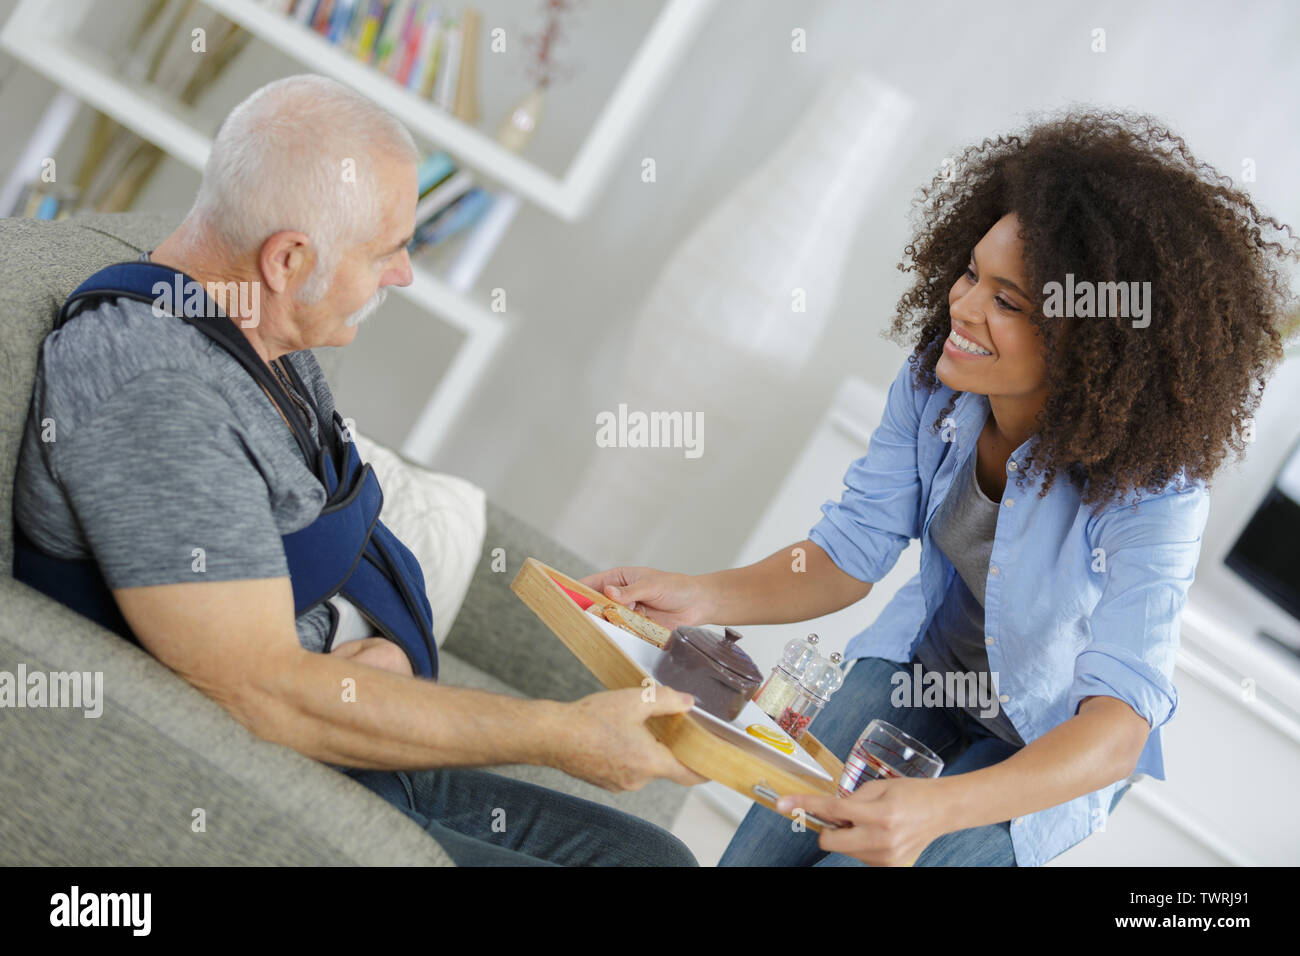 carer bringing meal to elderly man with arm injury Stock Photo